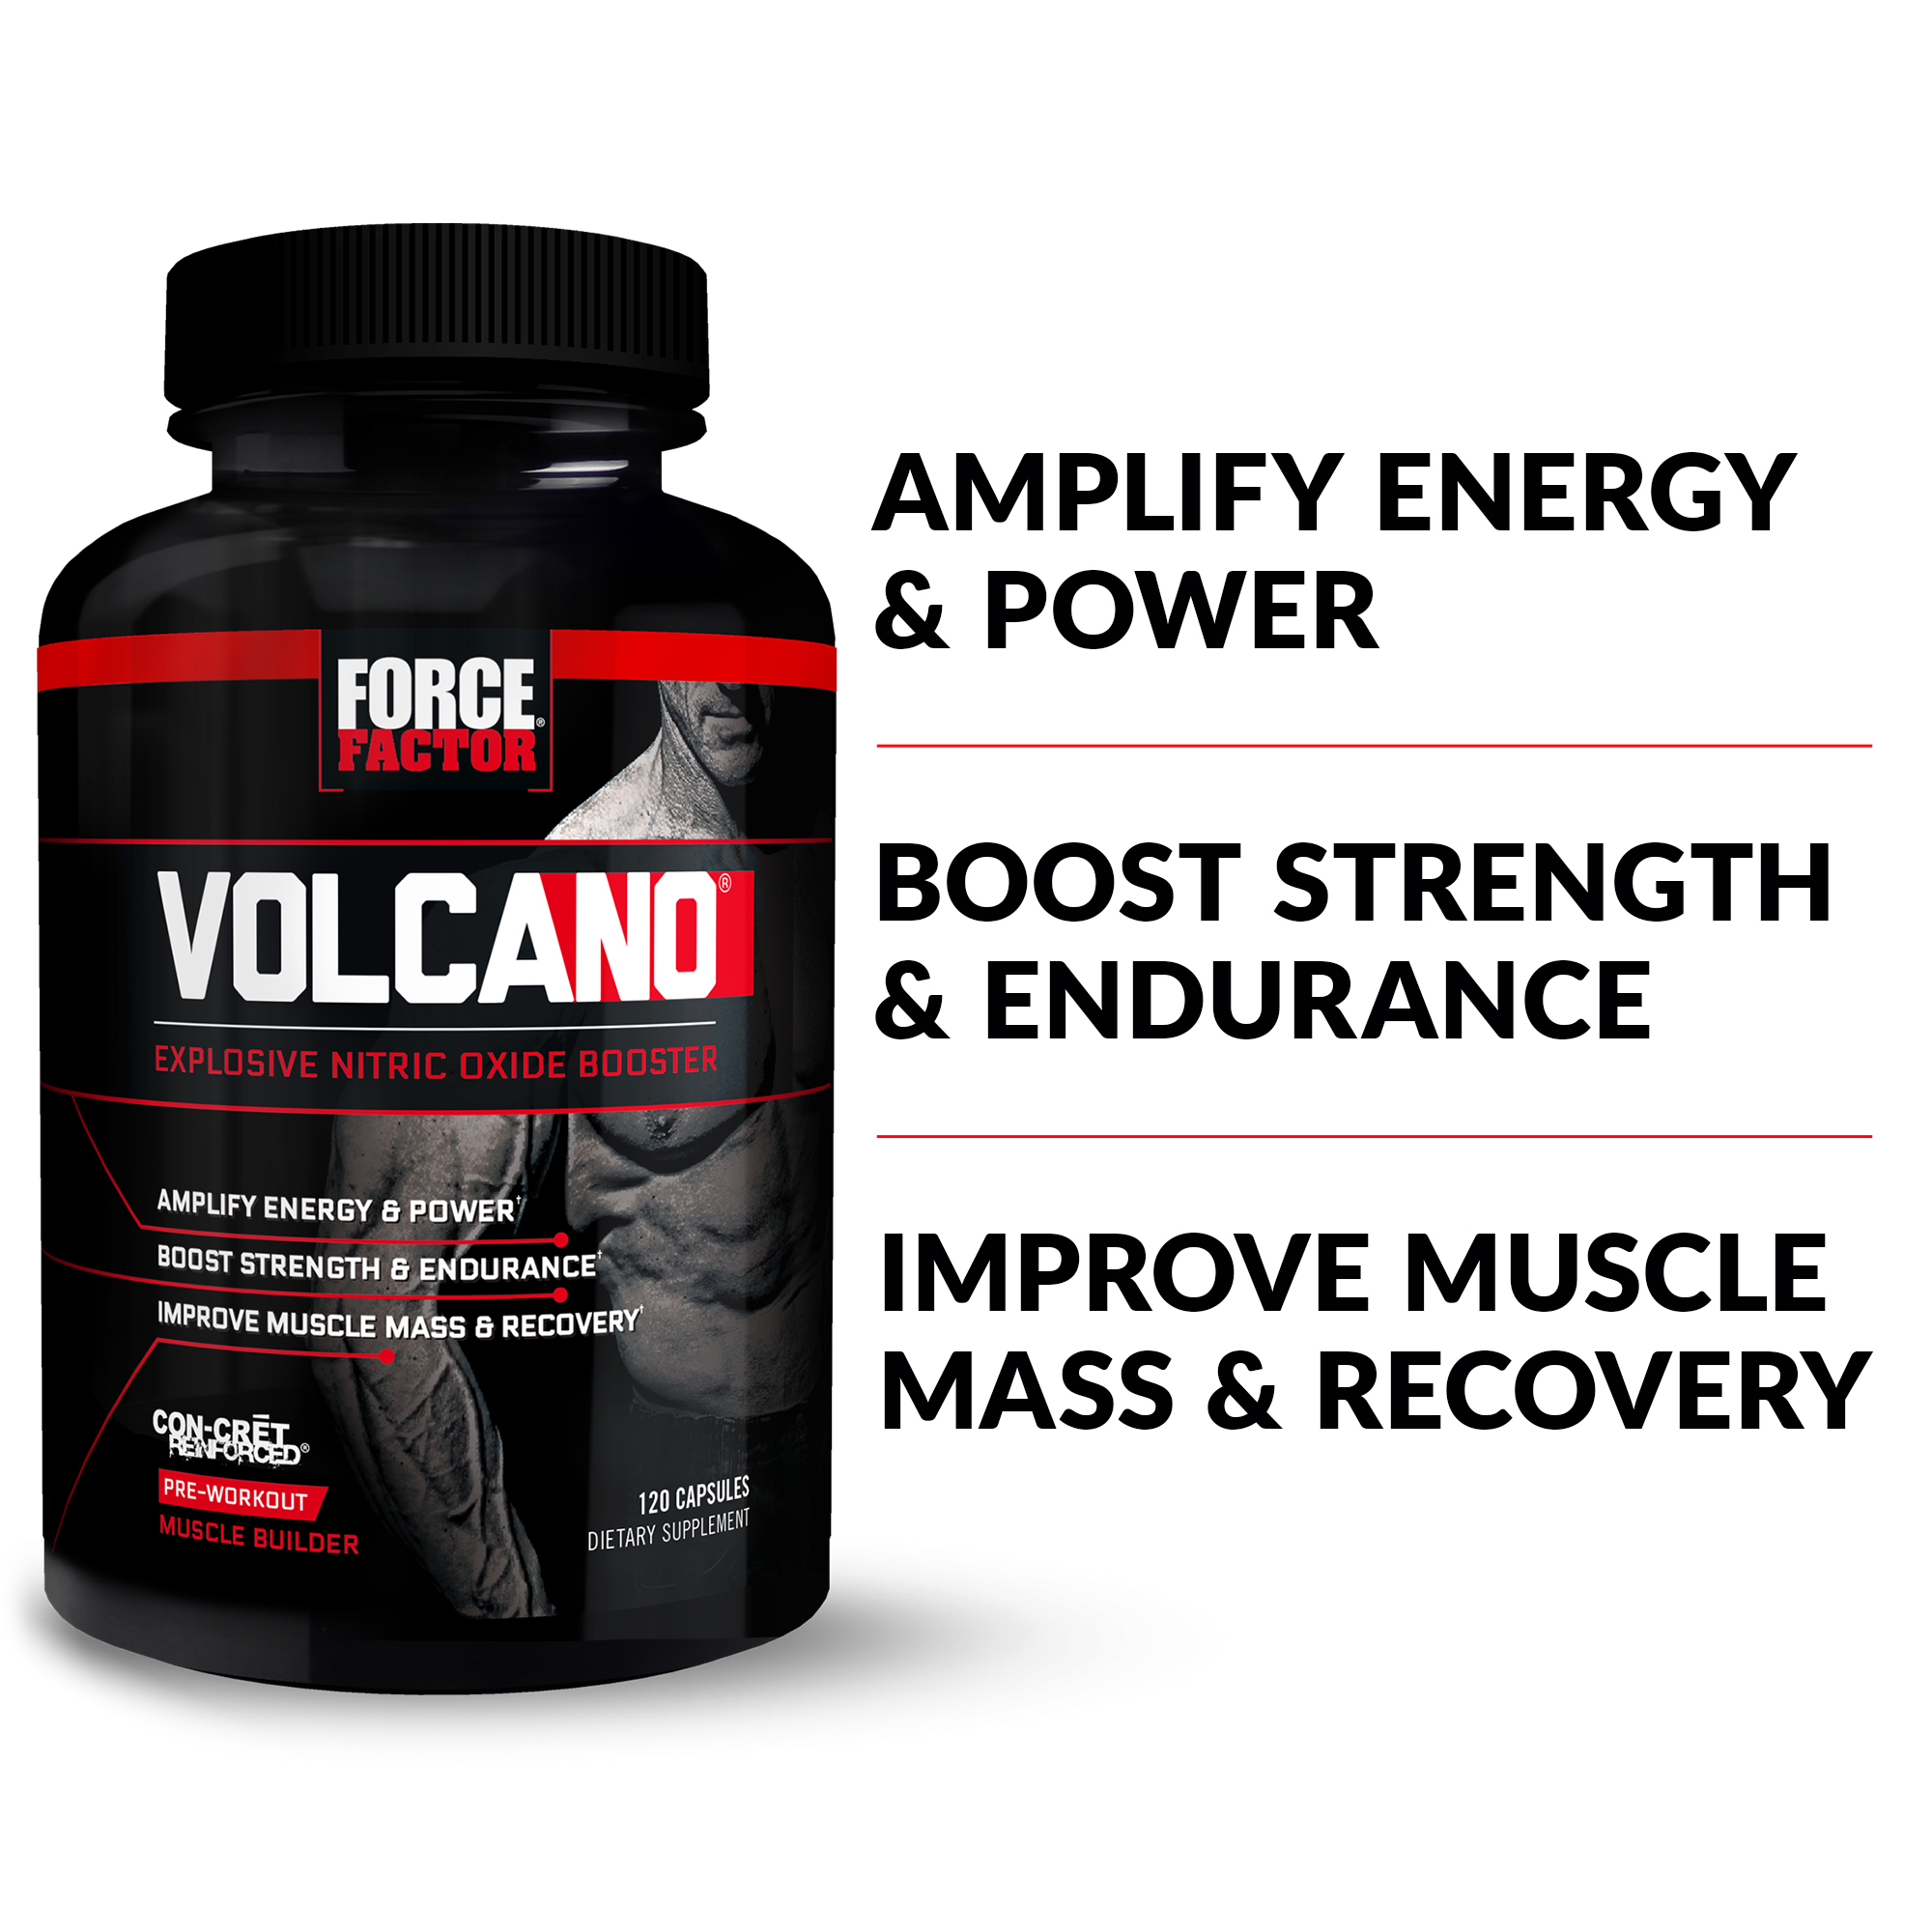 Force Factor Volcano Pre-Workout Nitric Oxide Booster Supplement for Men, 120 Capsules - image 2 of 10